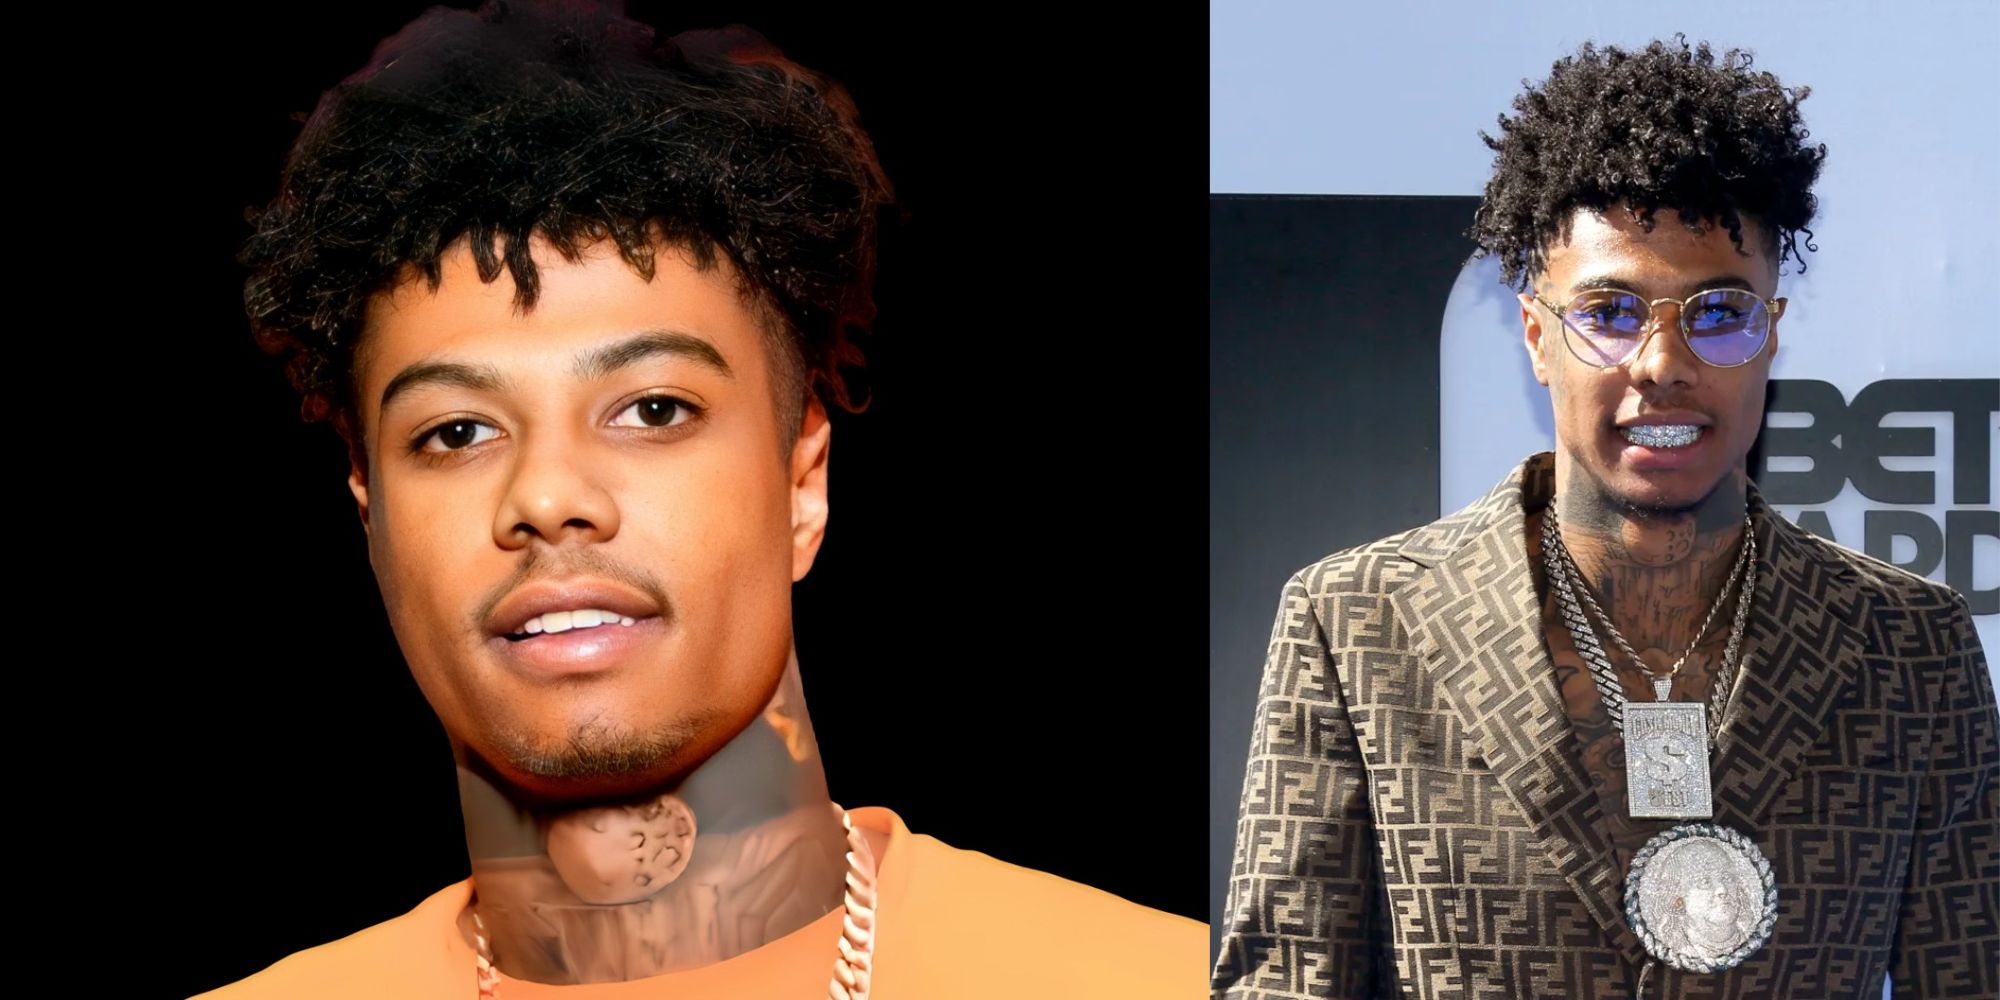 Who is Blueface Dating Now?